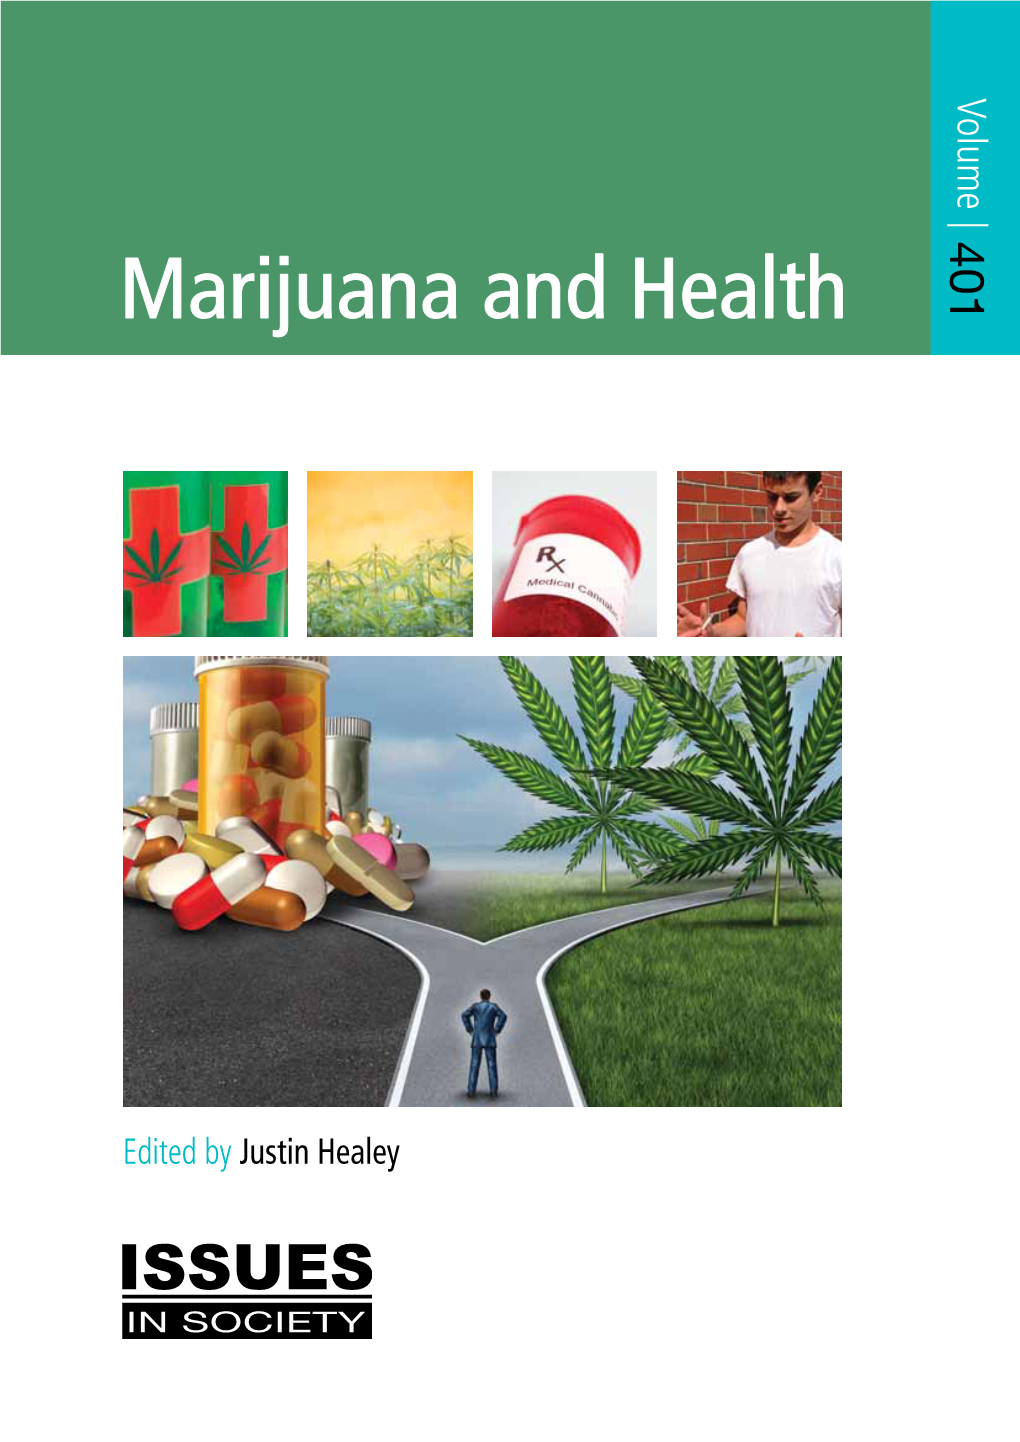 Marijuana and Health MARIJUANA and HEALTHMARIJUANA AND